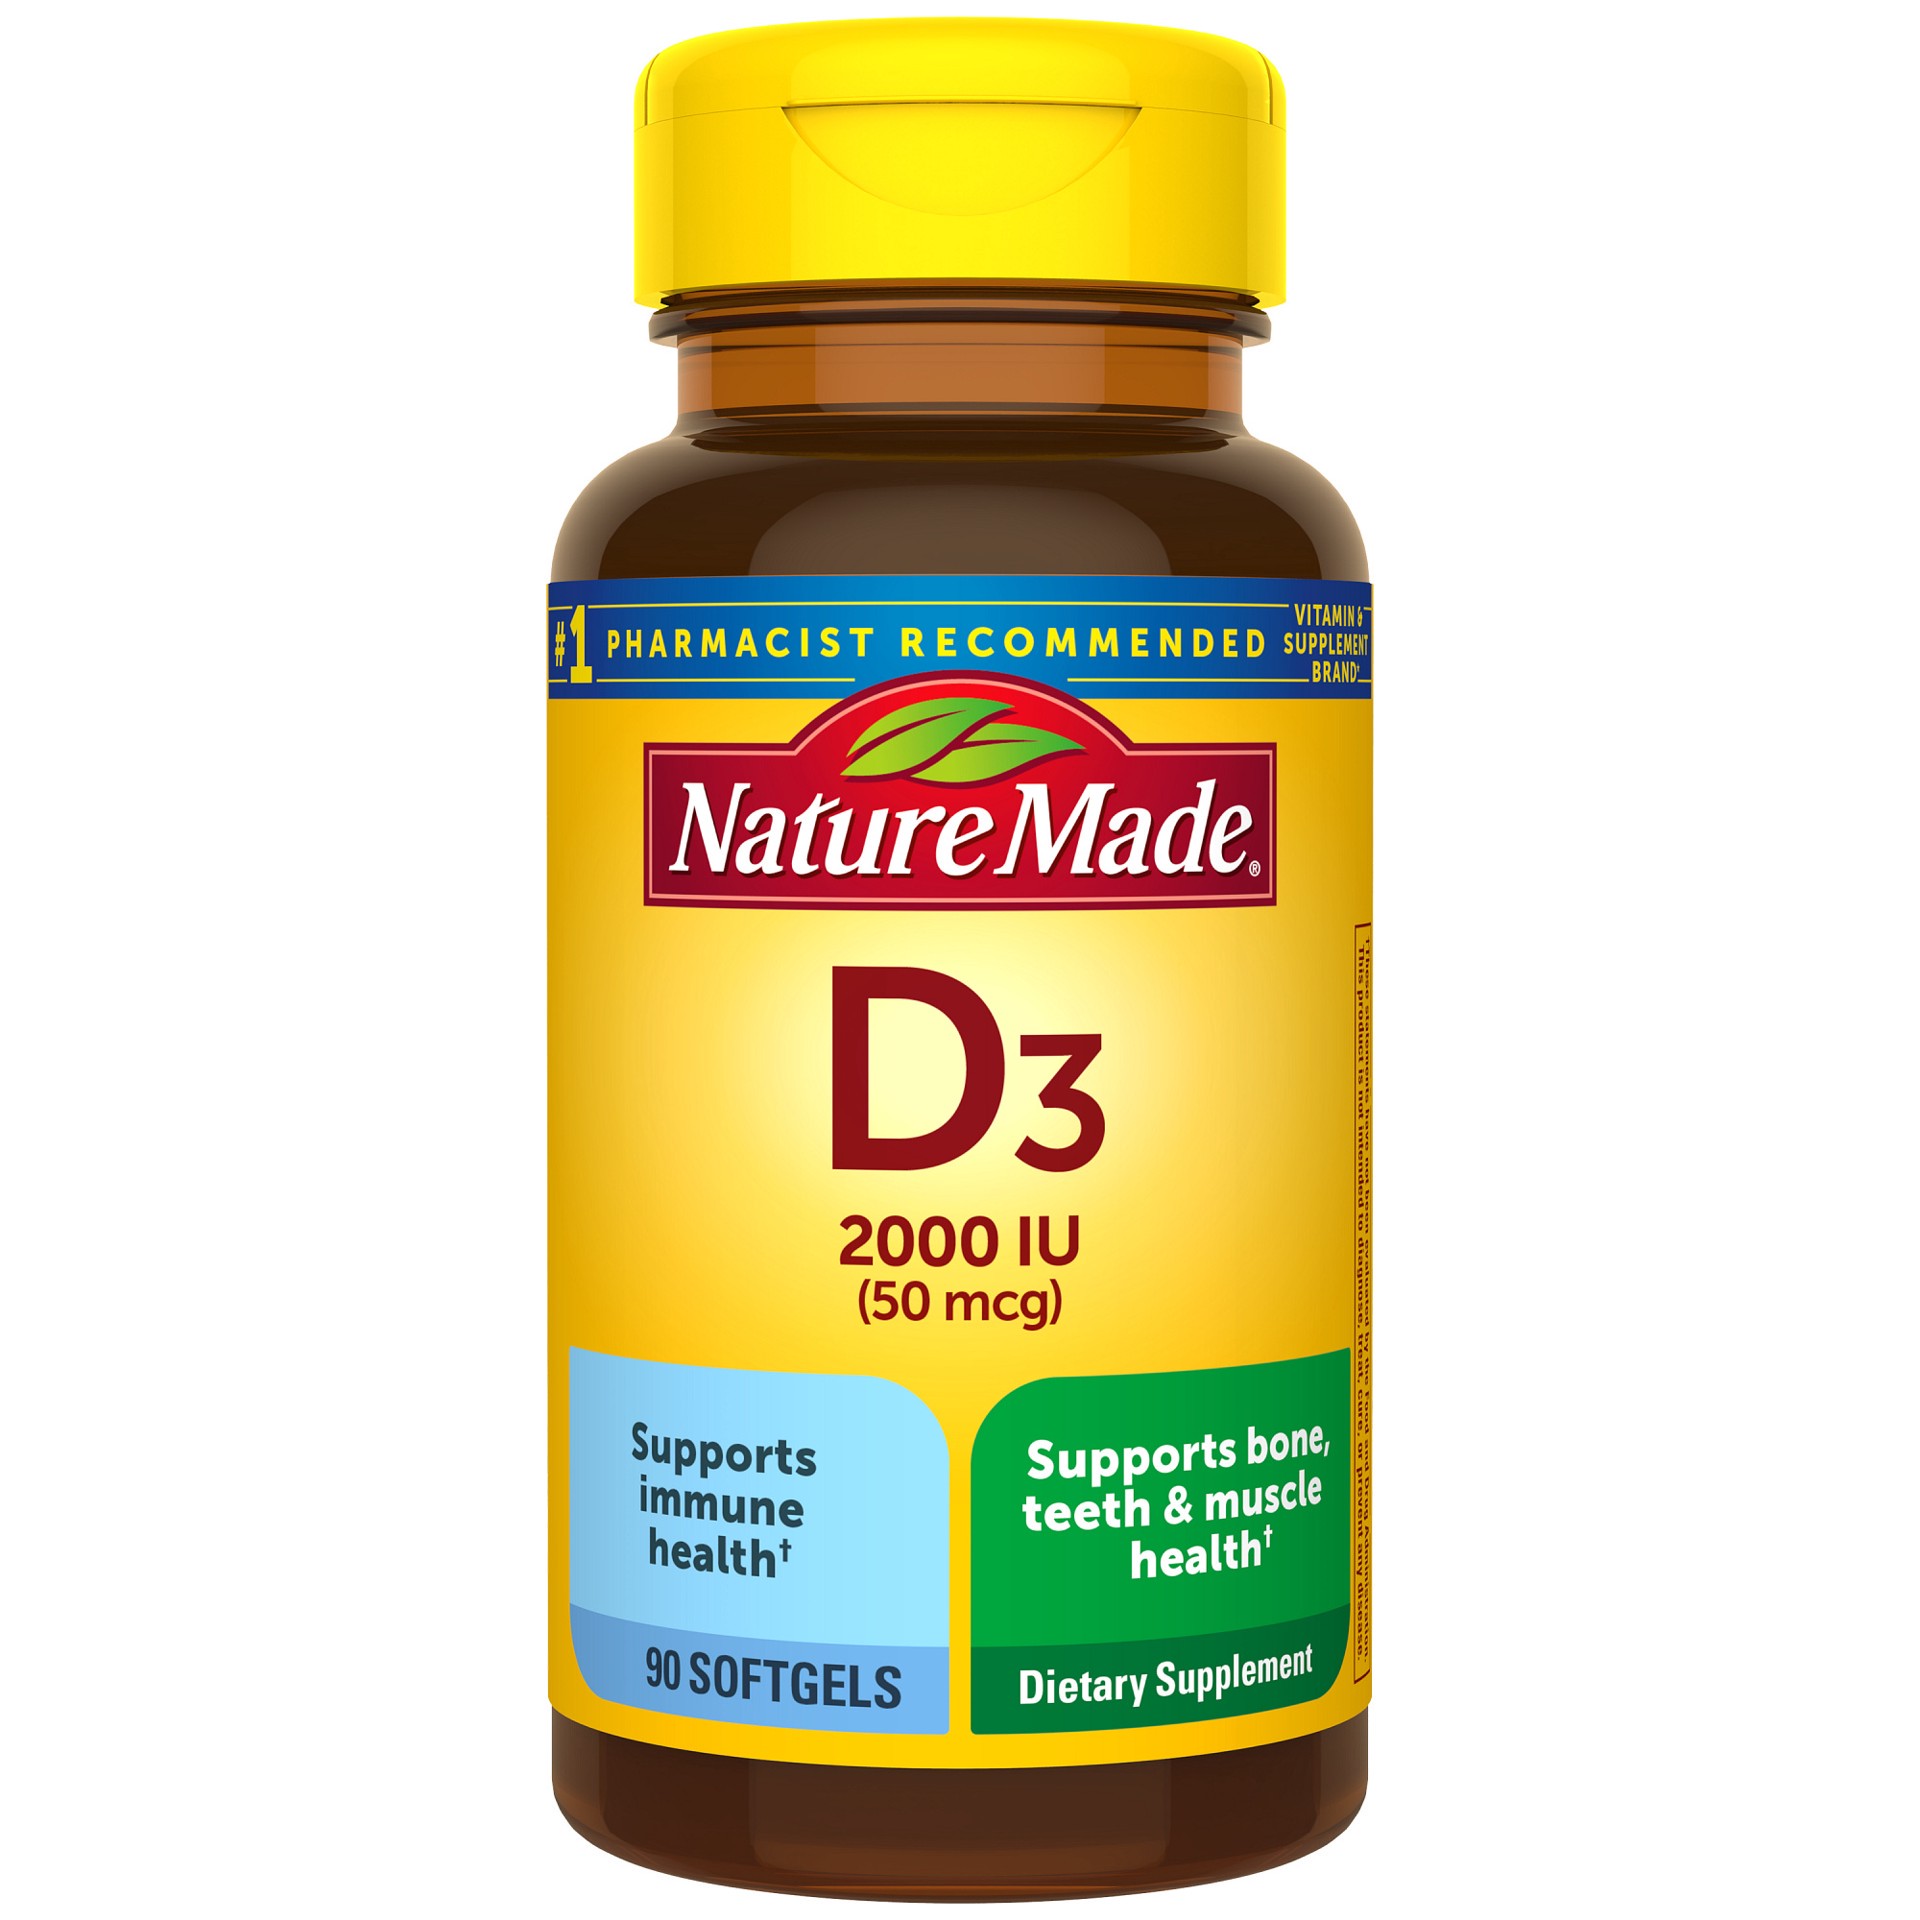 slide 1 of 10, Nature Made Vitamin D3 2000 IU (50 mcg), Dietary Supplement for Bone, Teeth, Muscle and Immune Health Support, 90 Softgels, 90 Day Supply, 90 ct